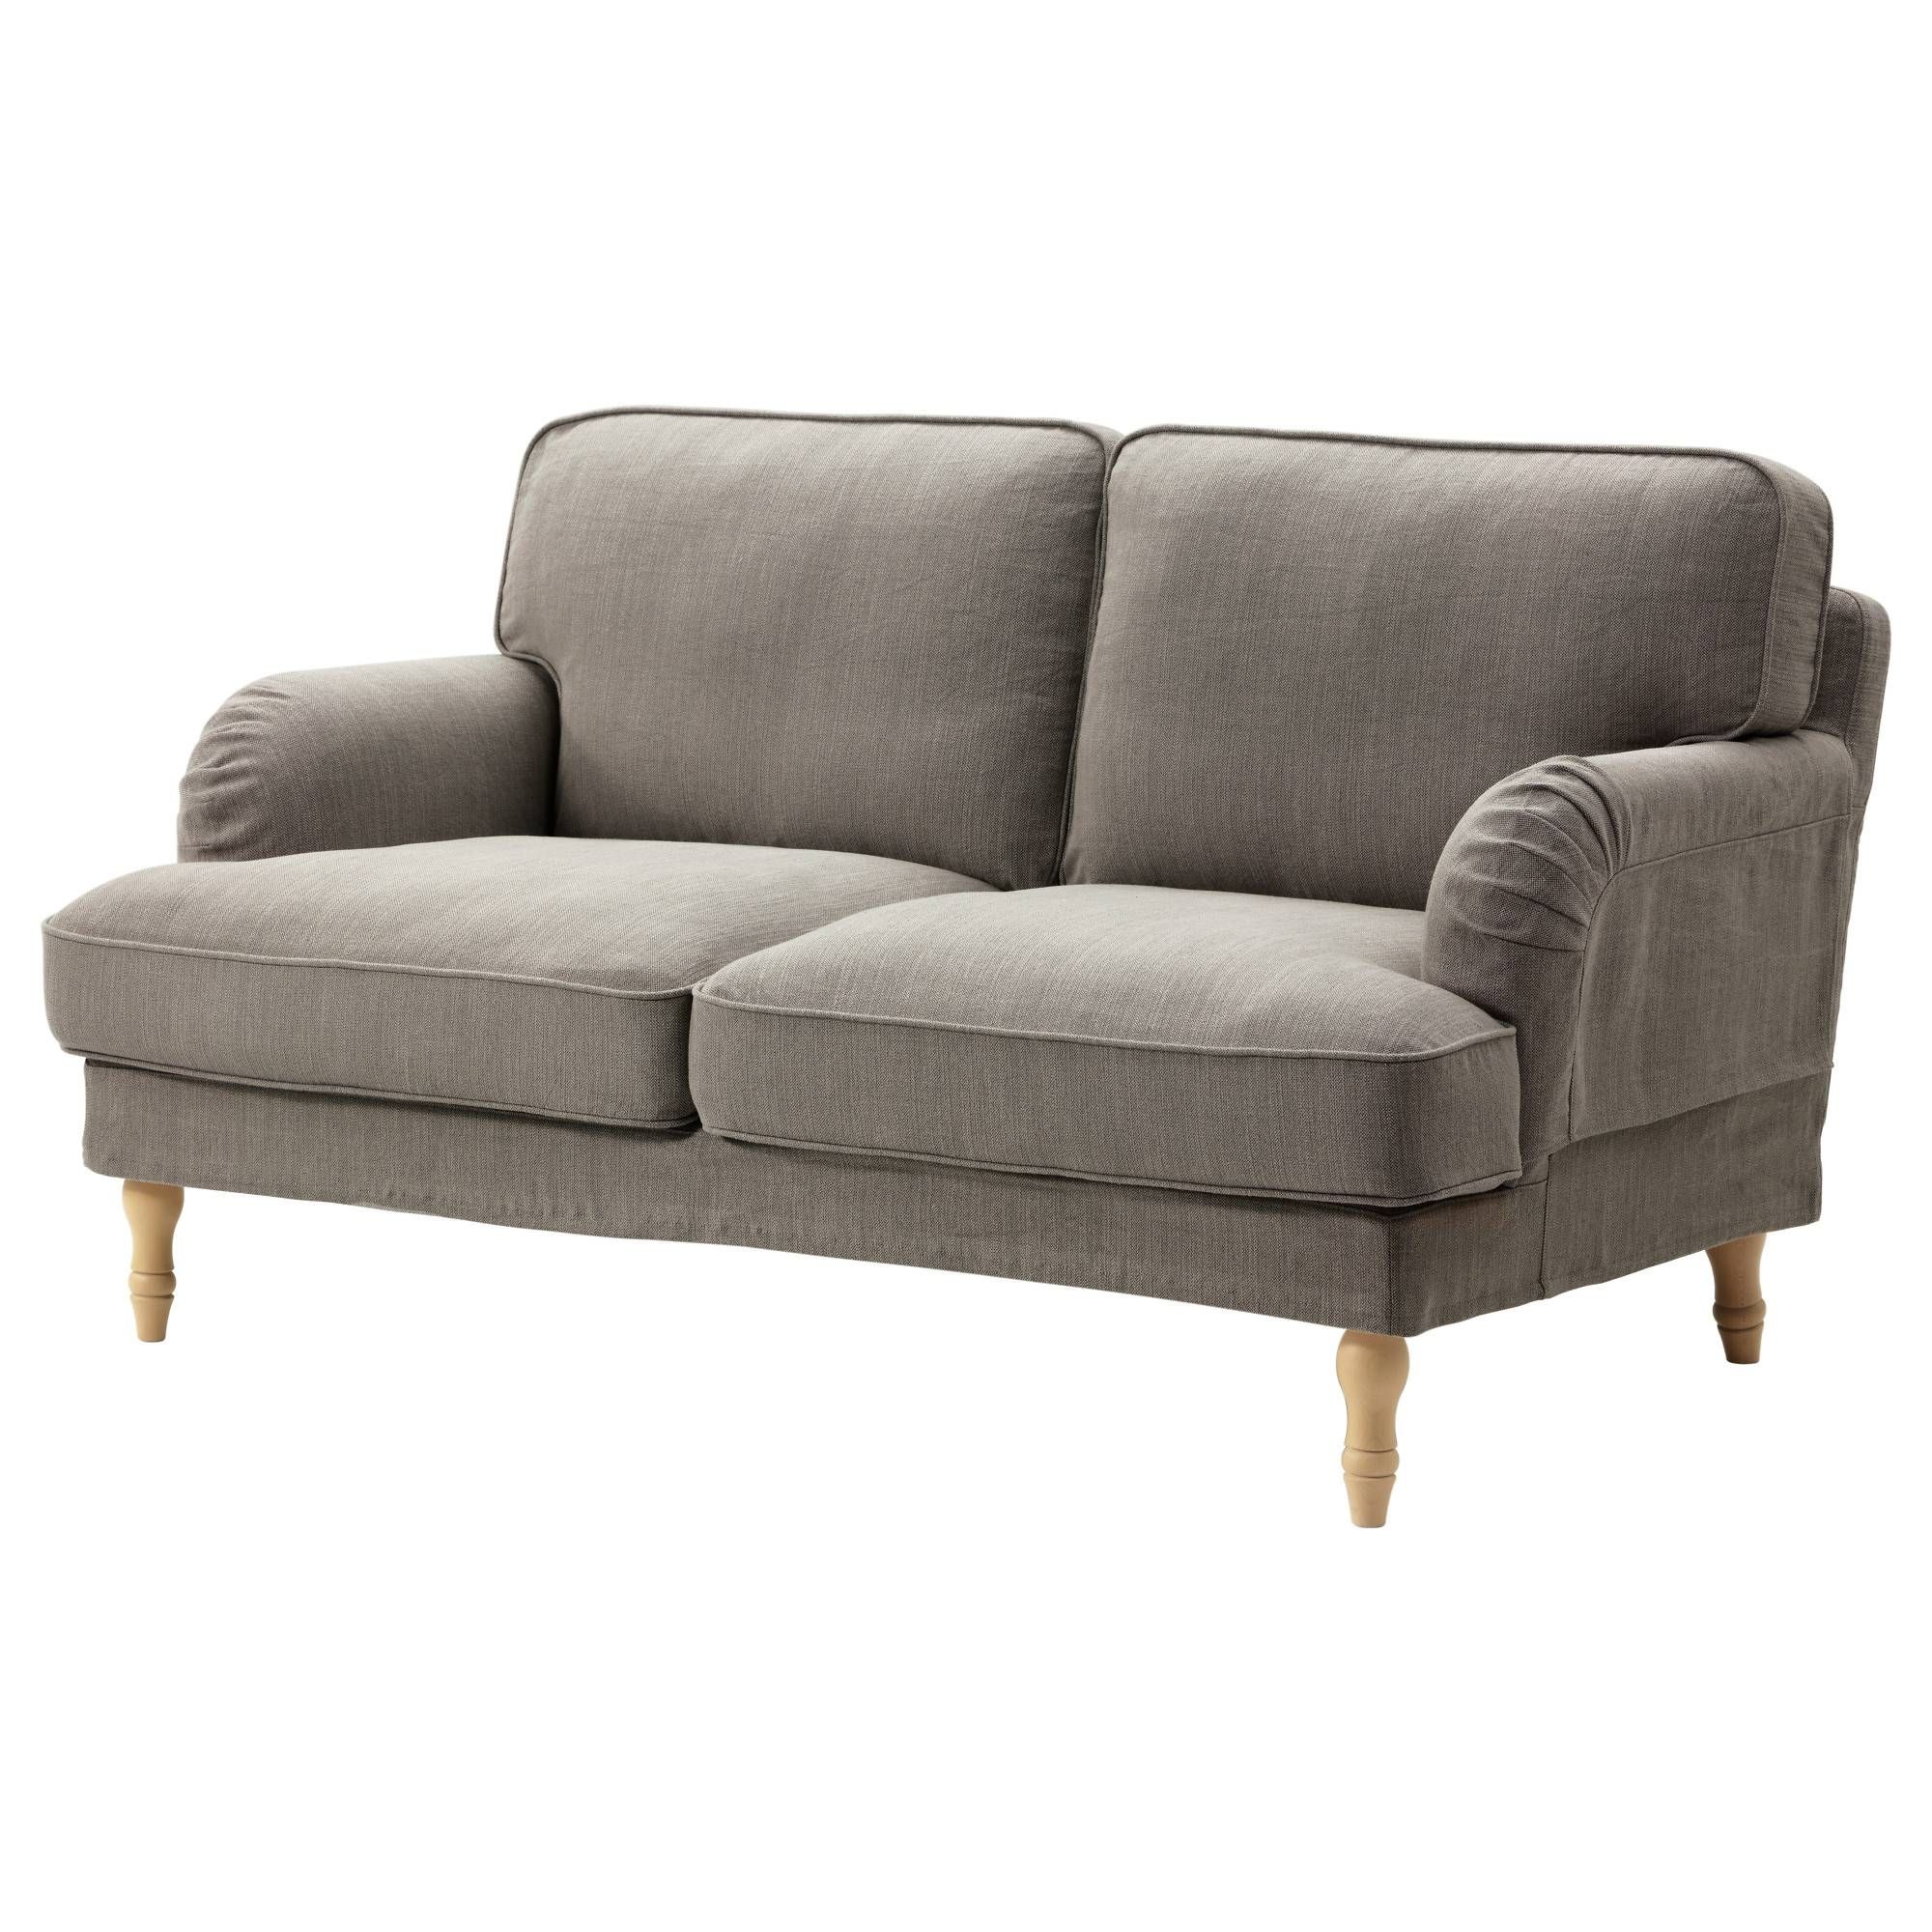 Stocksund Two Seat Sofa Nolhaga Grey Beige/light Brown/wood – Ikea Throughout Two Seater Chairs (Photo 23 of 30)